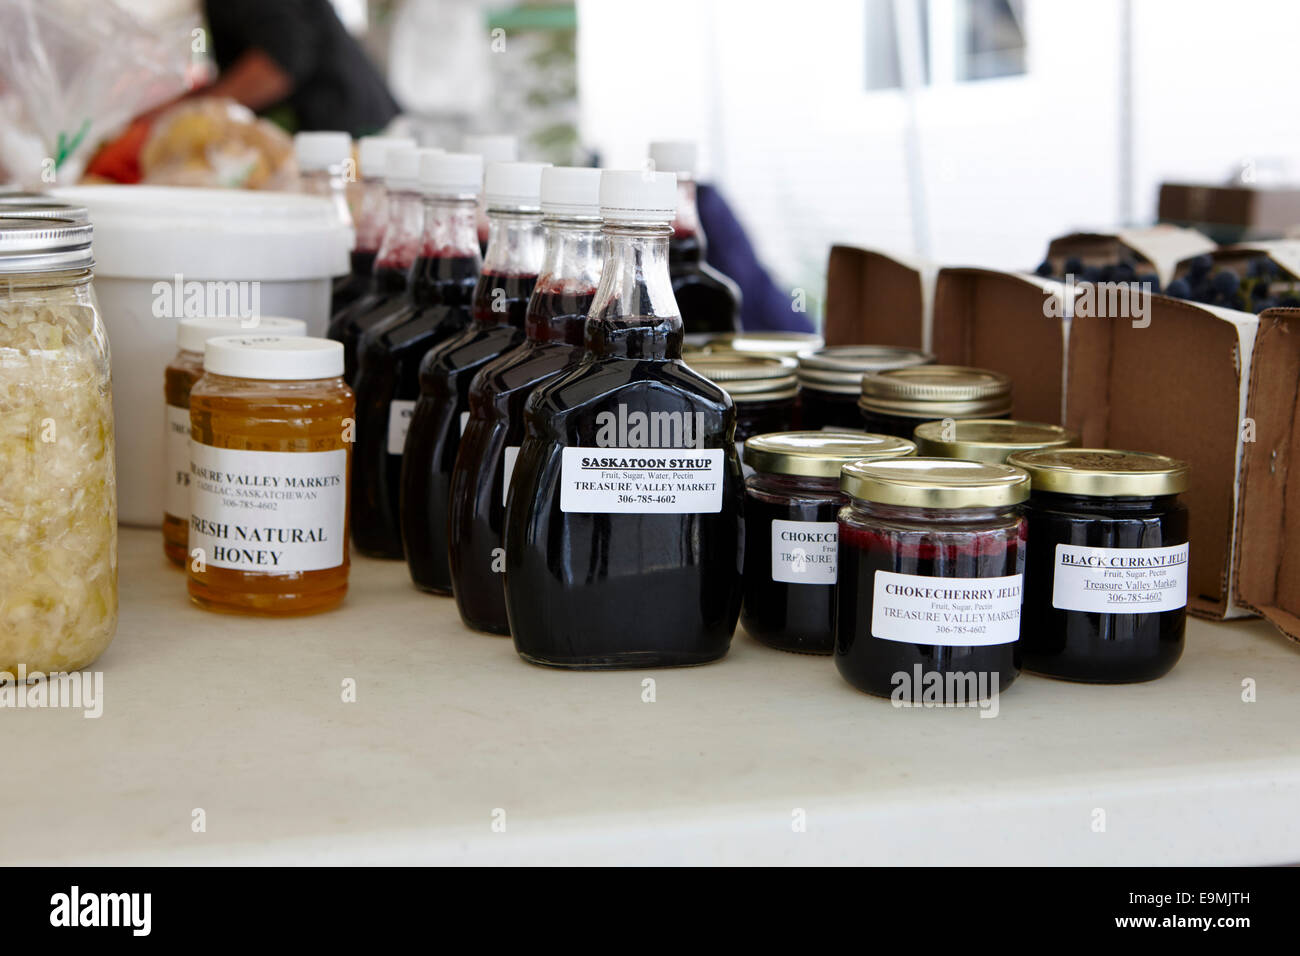 local produce on sale at a small farmers market in swift current Saskatchewan Canada Stock Photo